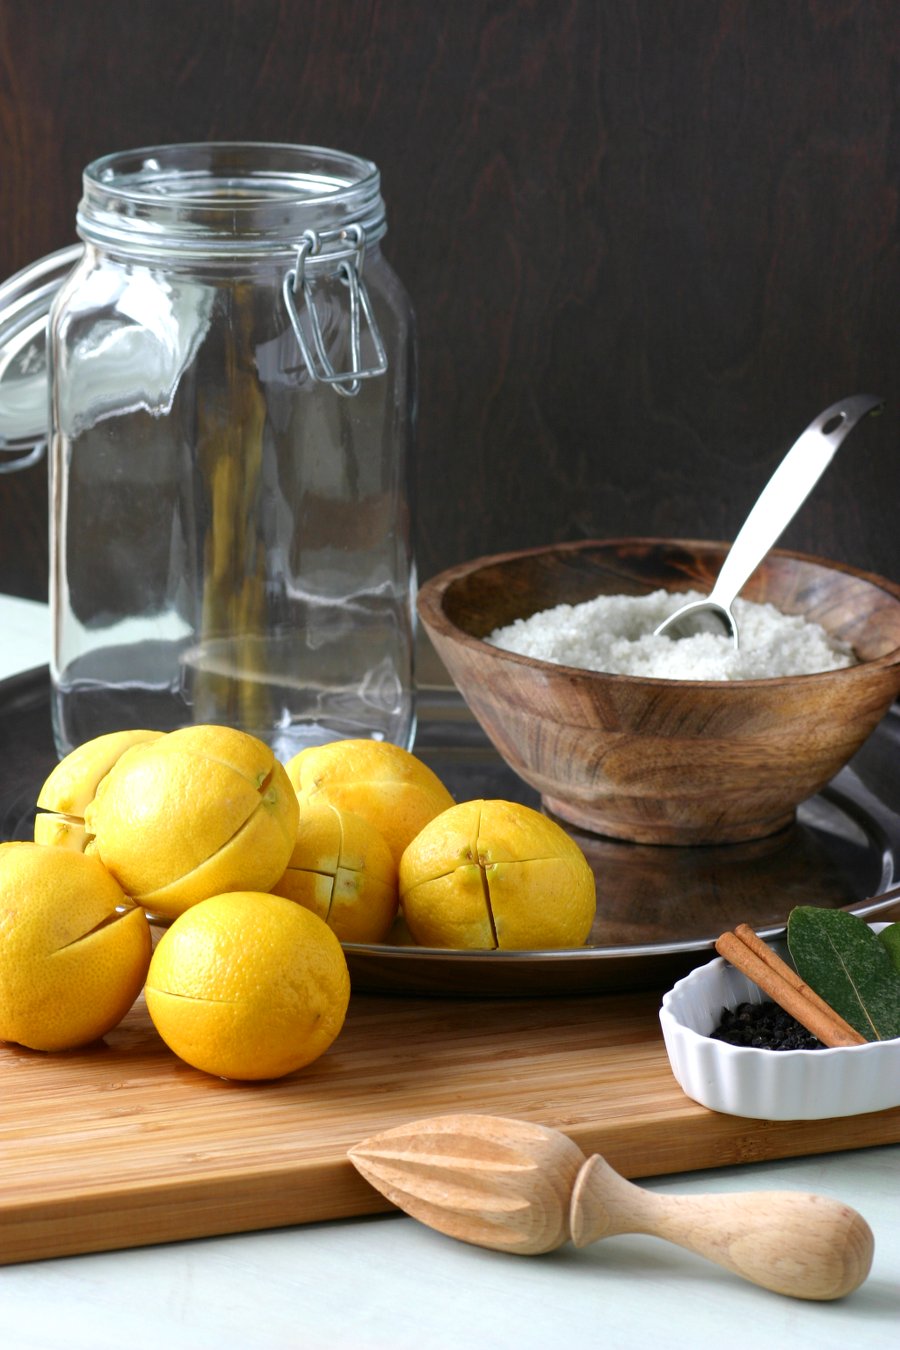 Give your favorite Moroccan and North African dishes that zesty, authentic taste with this really easy recipe for Homemade Preserved Lemons!